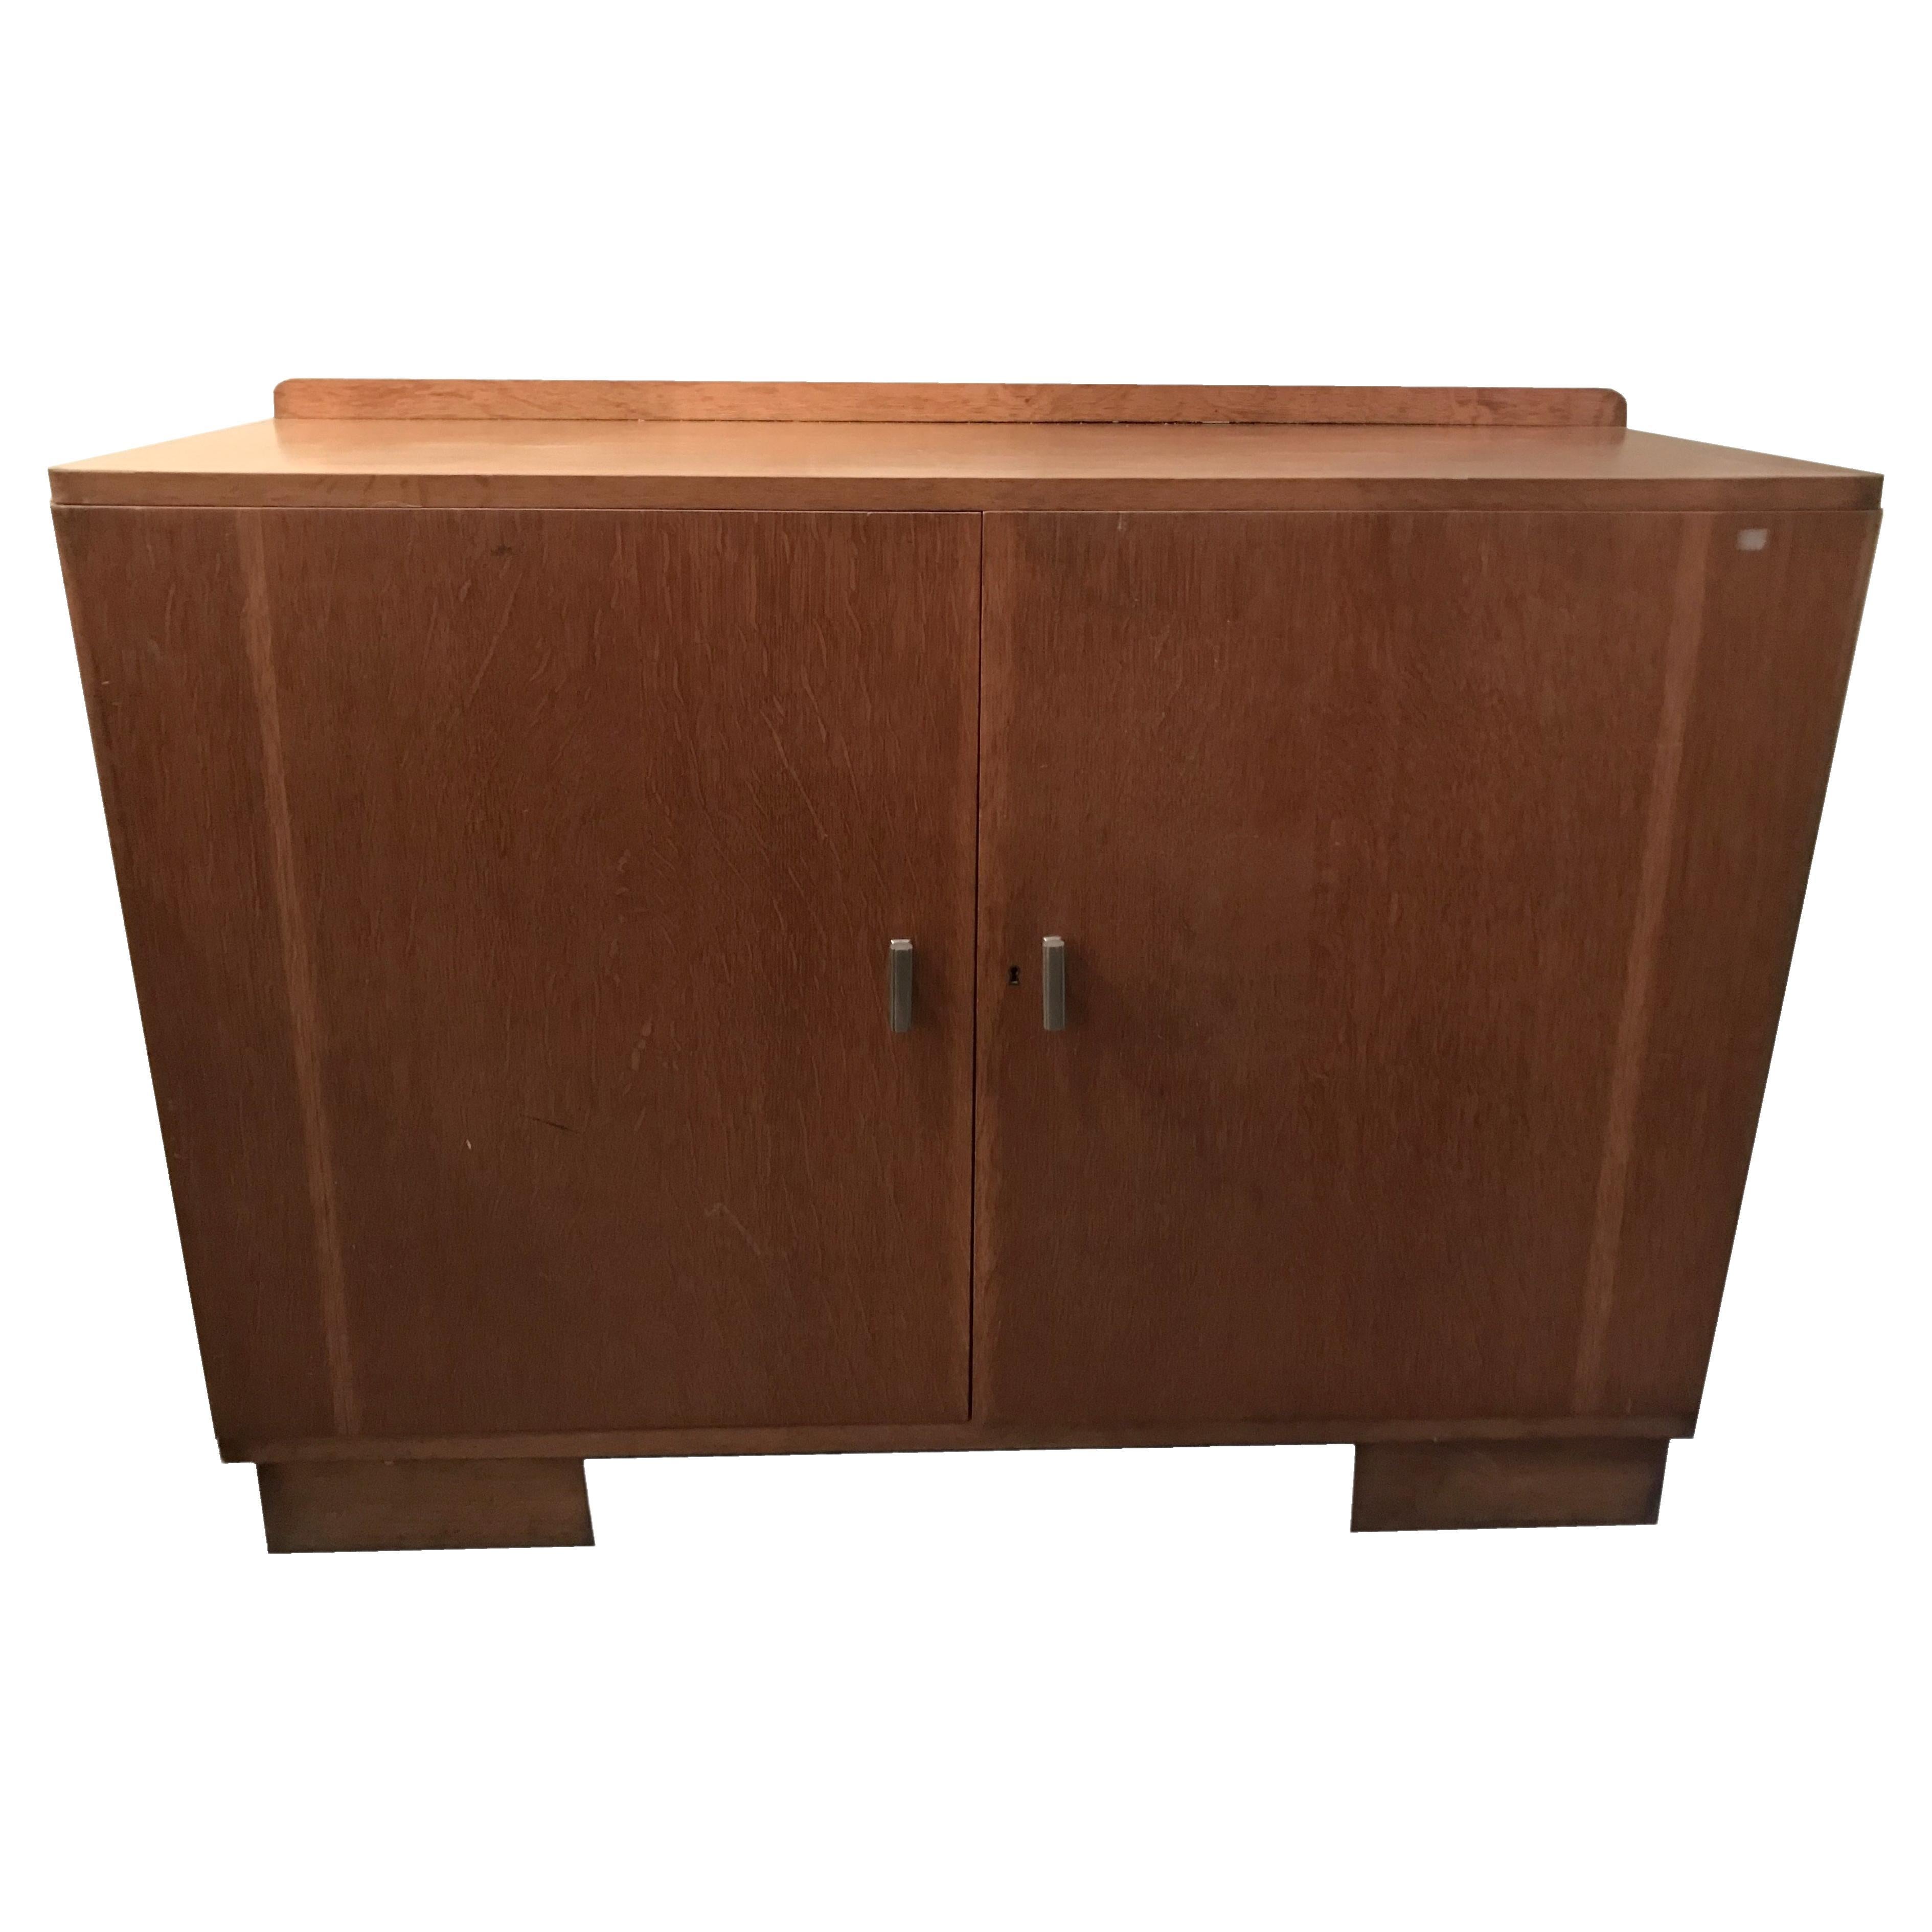 Art Deco Sideboard in Wood, 1930 For Sale